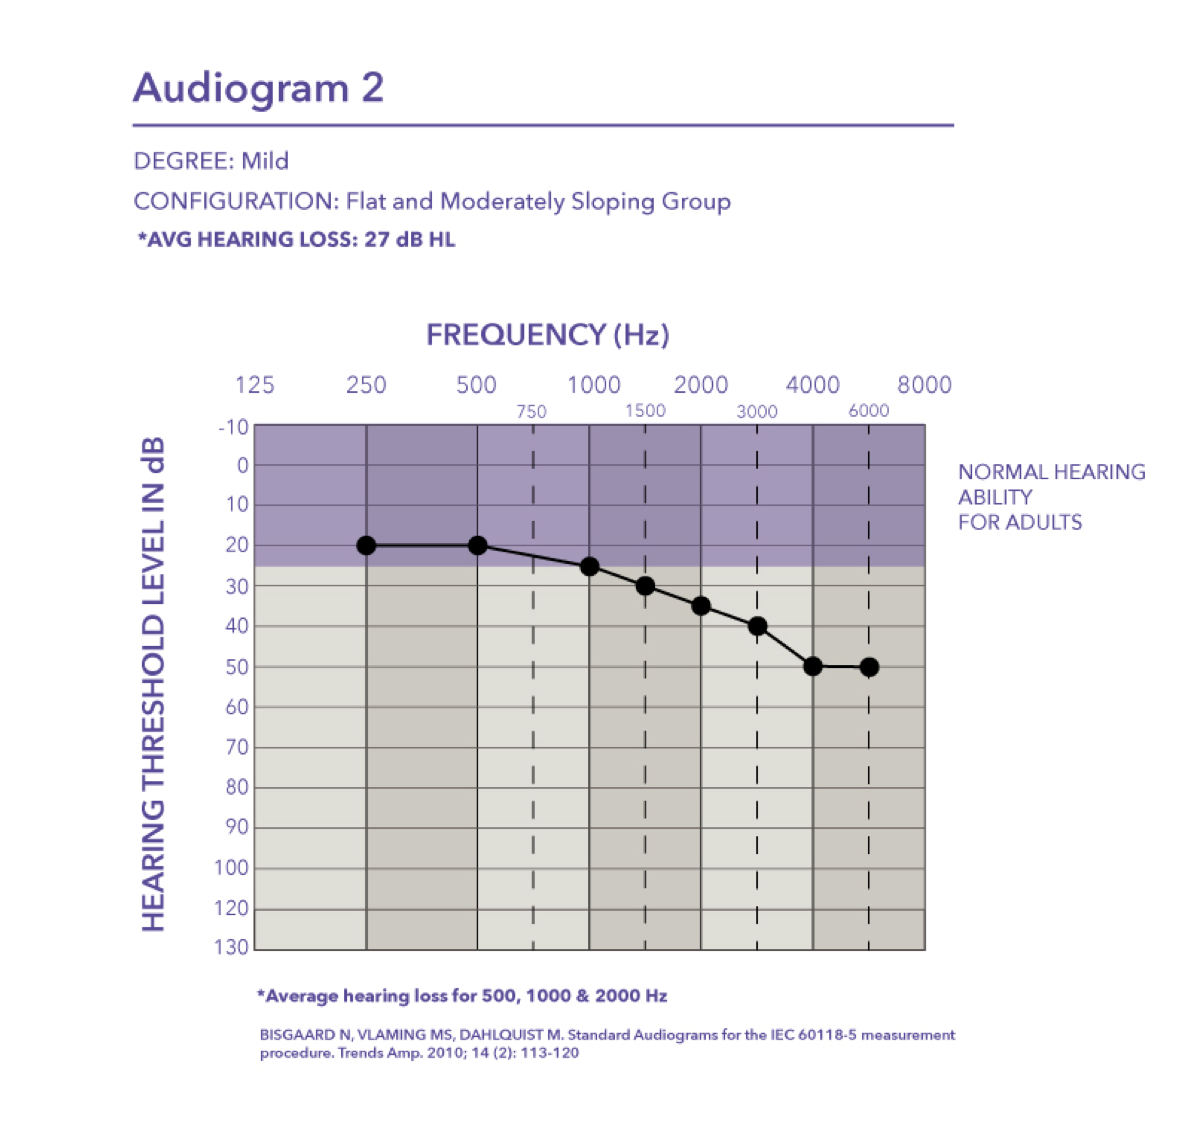 Mild hearing loss where the pure tone average is 27 dB HL